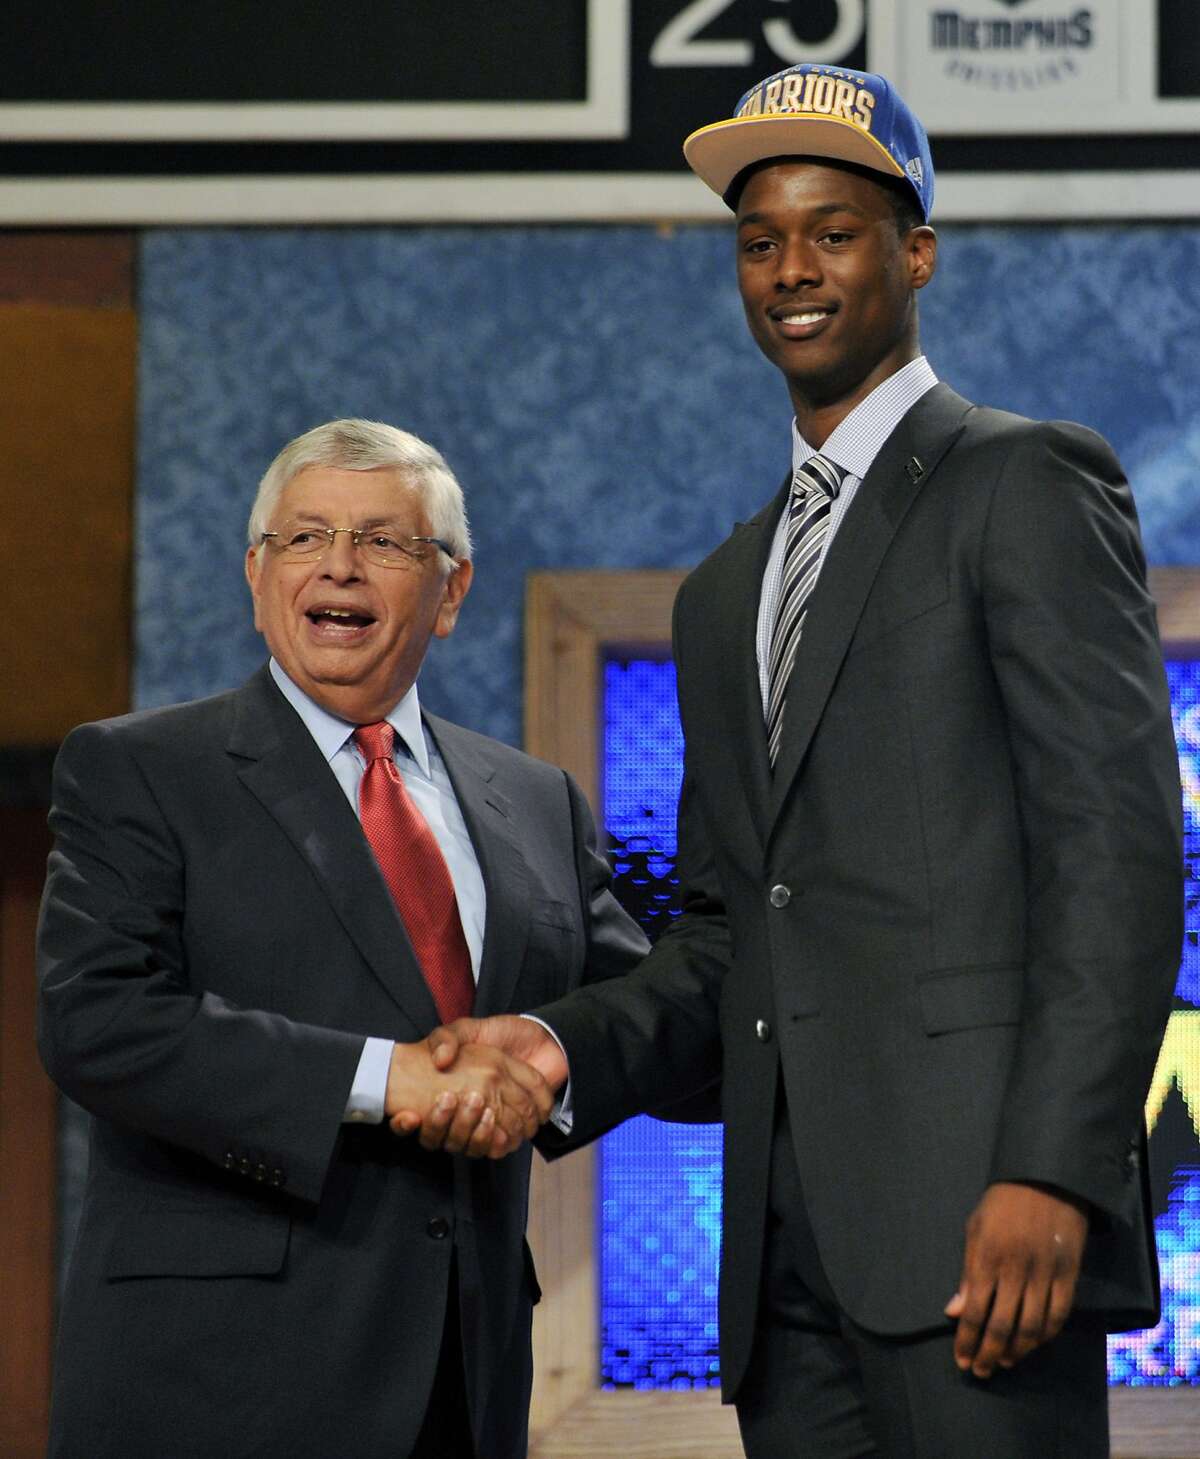 NBA Commissioner David Stern, left, poses with the No. 7 overall draft pick Harrison Barnes, of North Carolina, who was selected by the Golden State Warriors in the NBA basketball draft, Thursday, June, 28, 2012, in Newark, N.J. (AP Photo/Bill Kostroun)